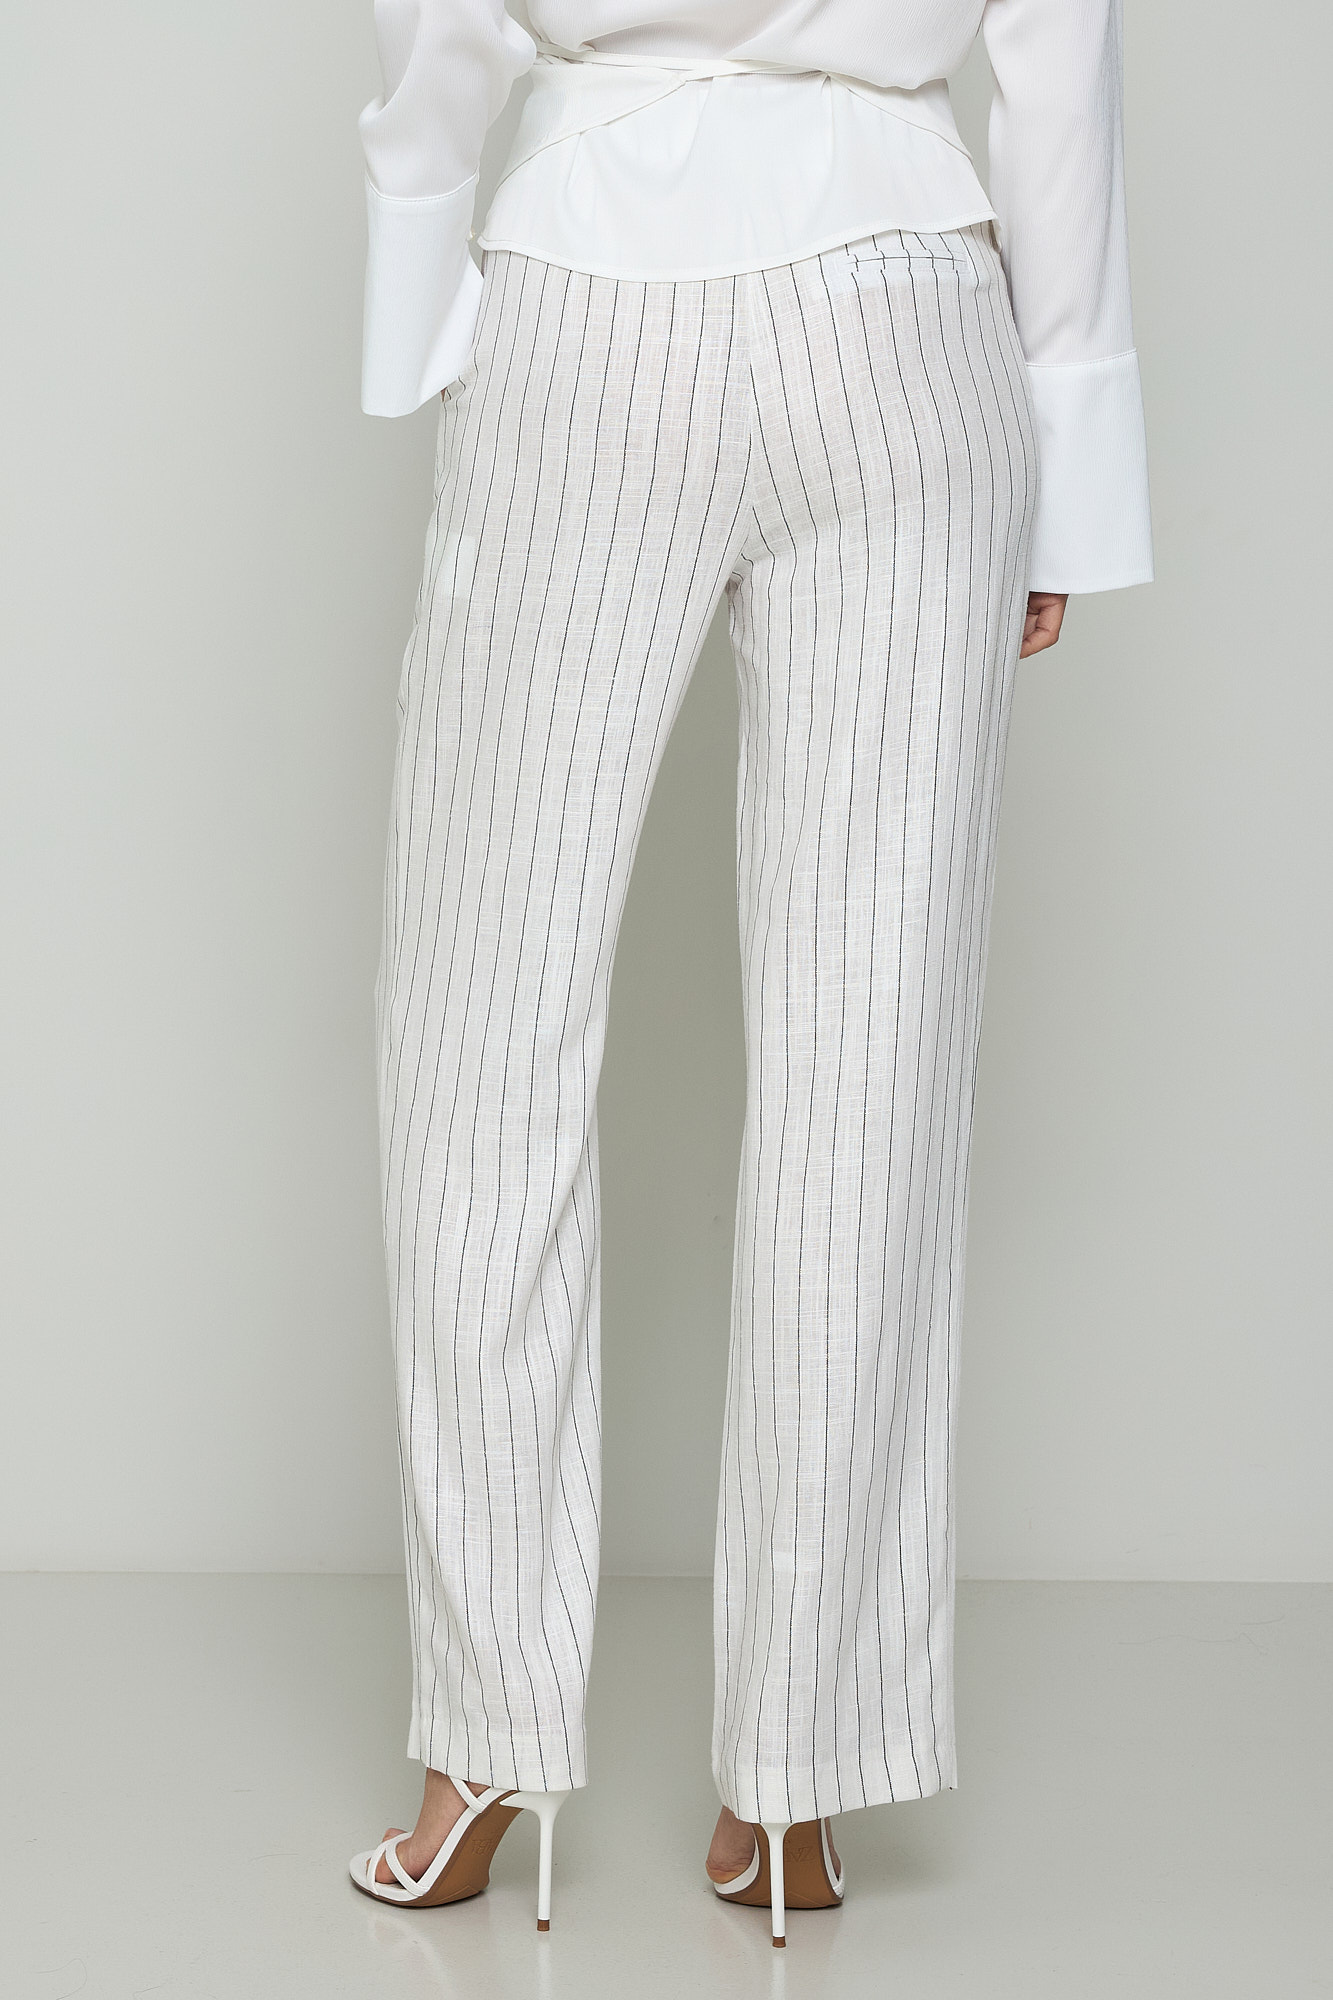 Picture of Tailored striped pants